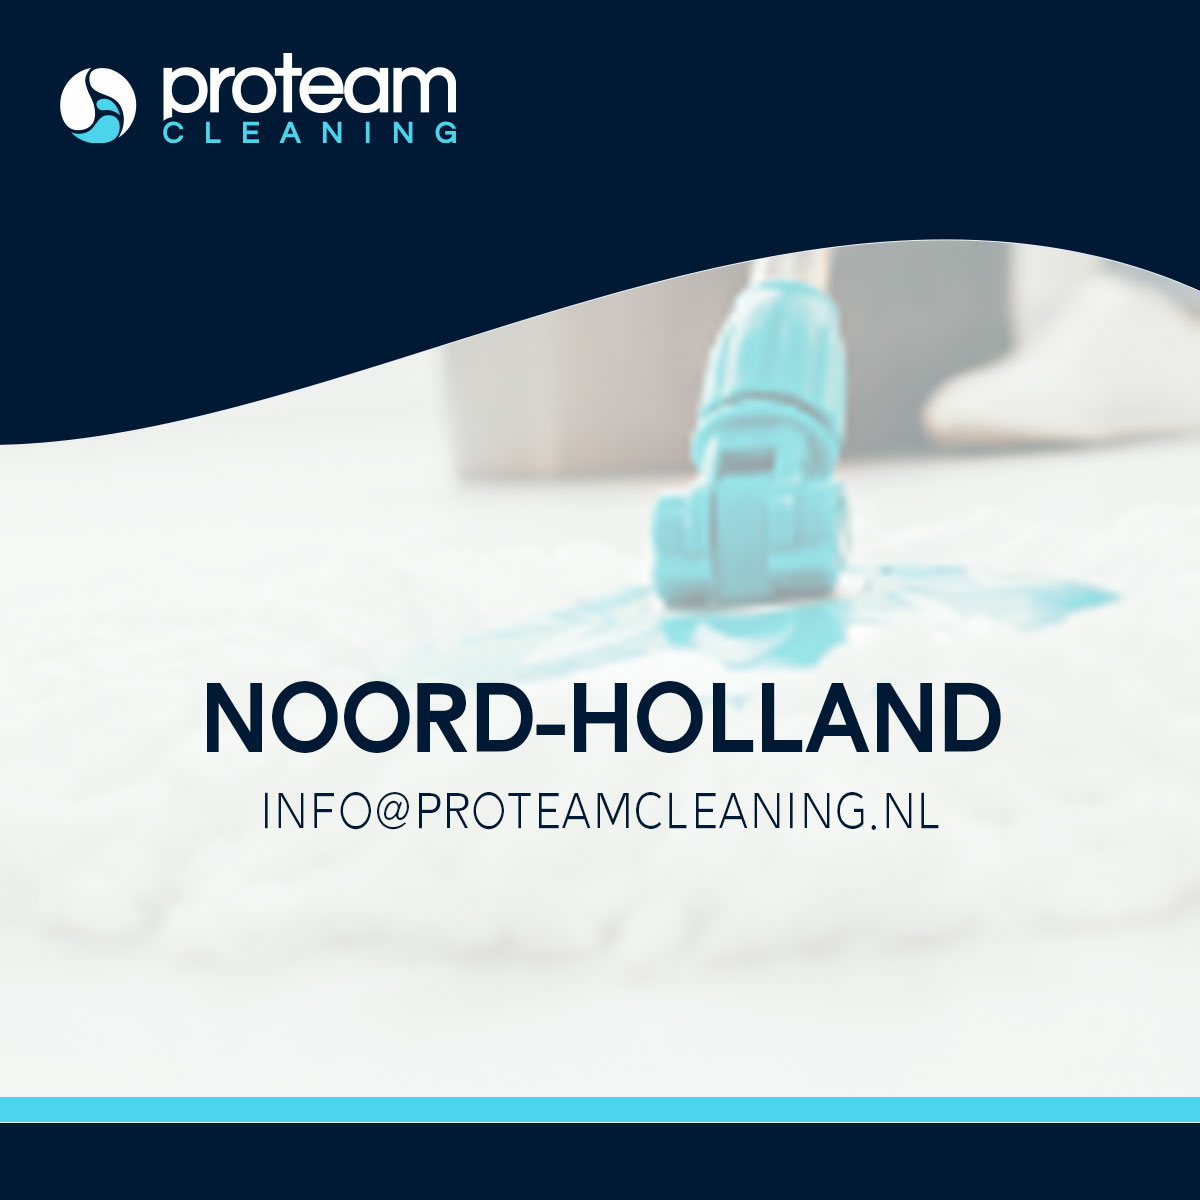 proteam cleaning logo